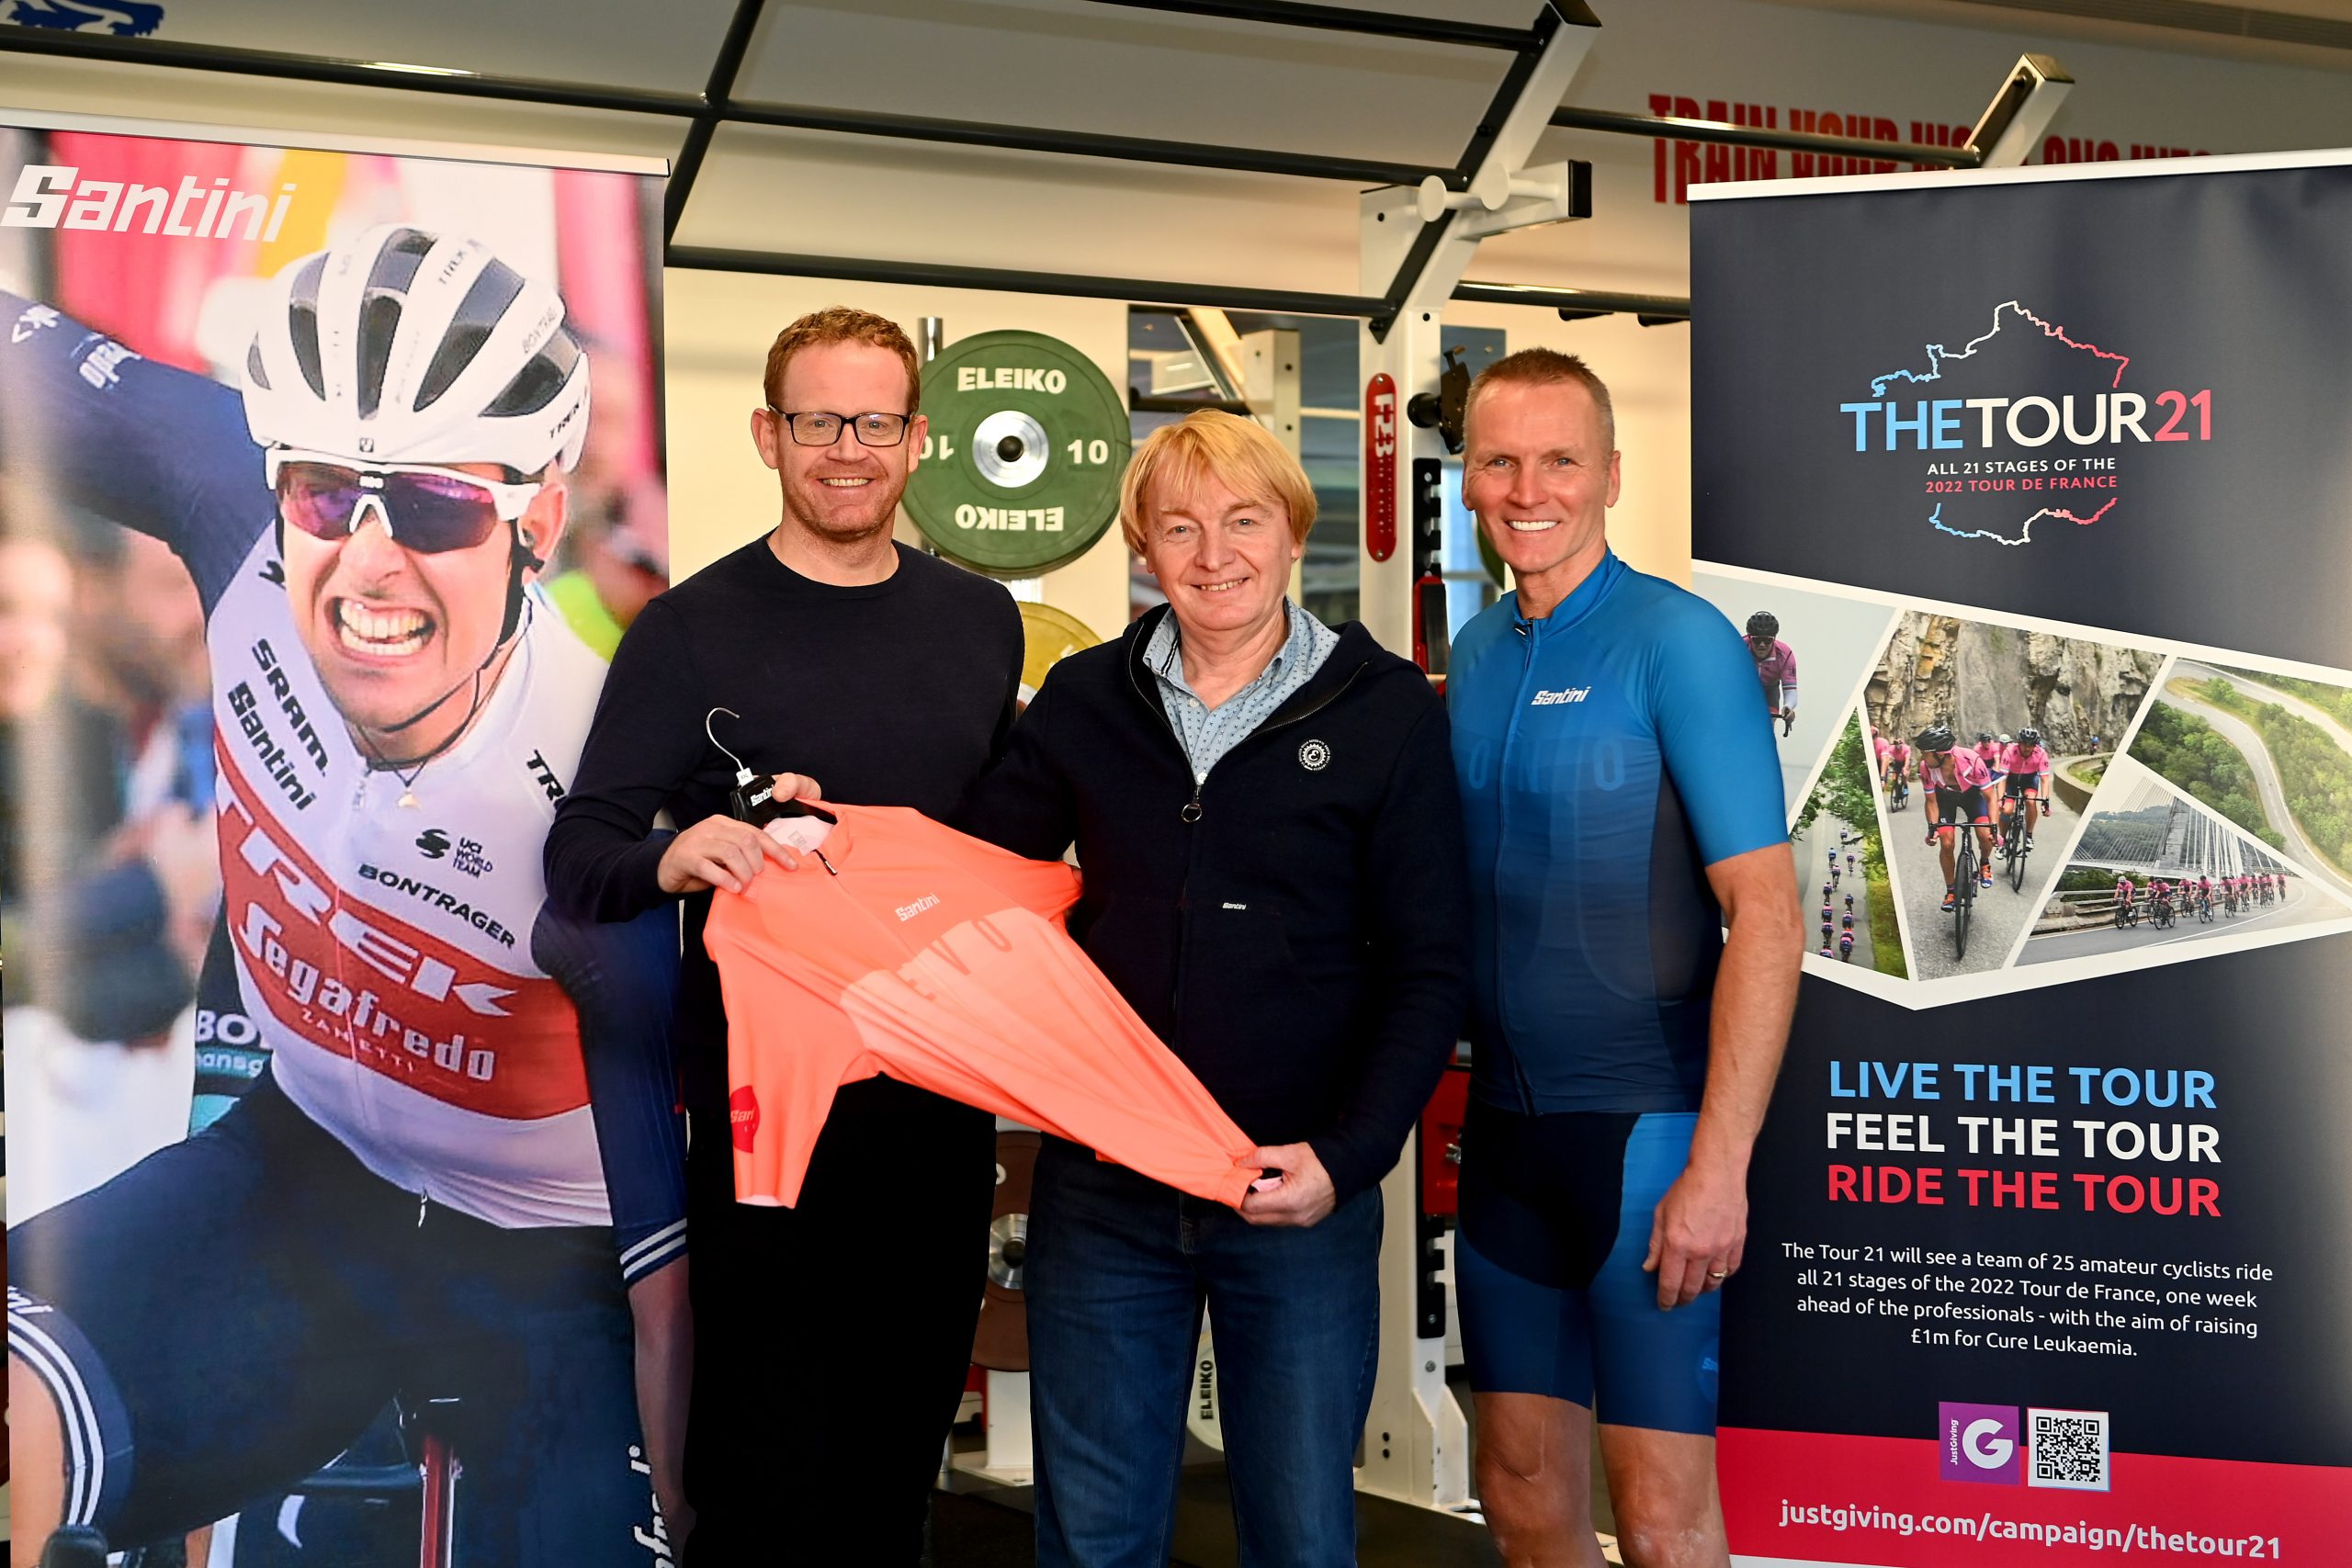 Santini named as Official Kit Supplier for Cure Leukaemia & The Tour 21